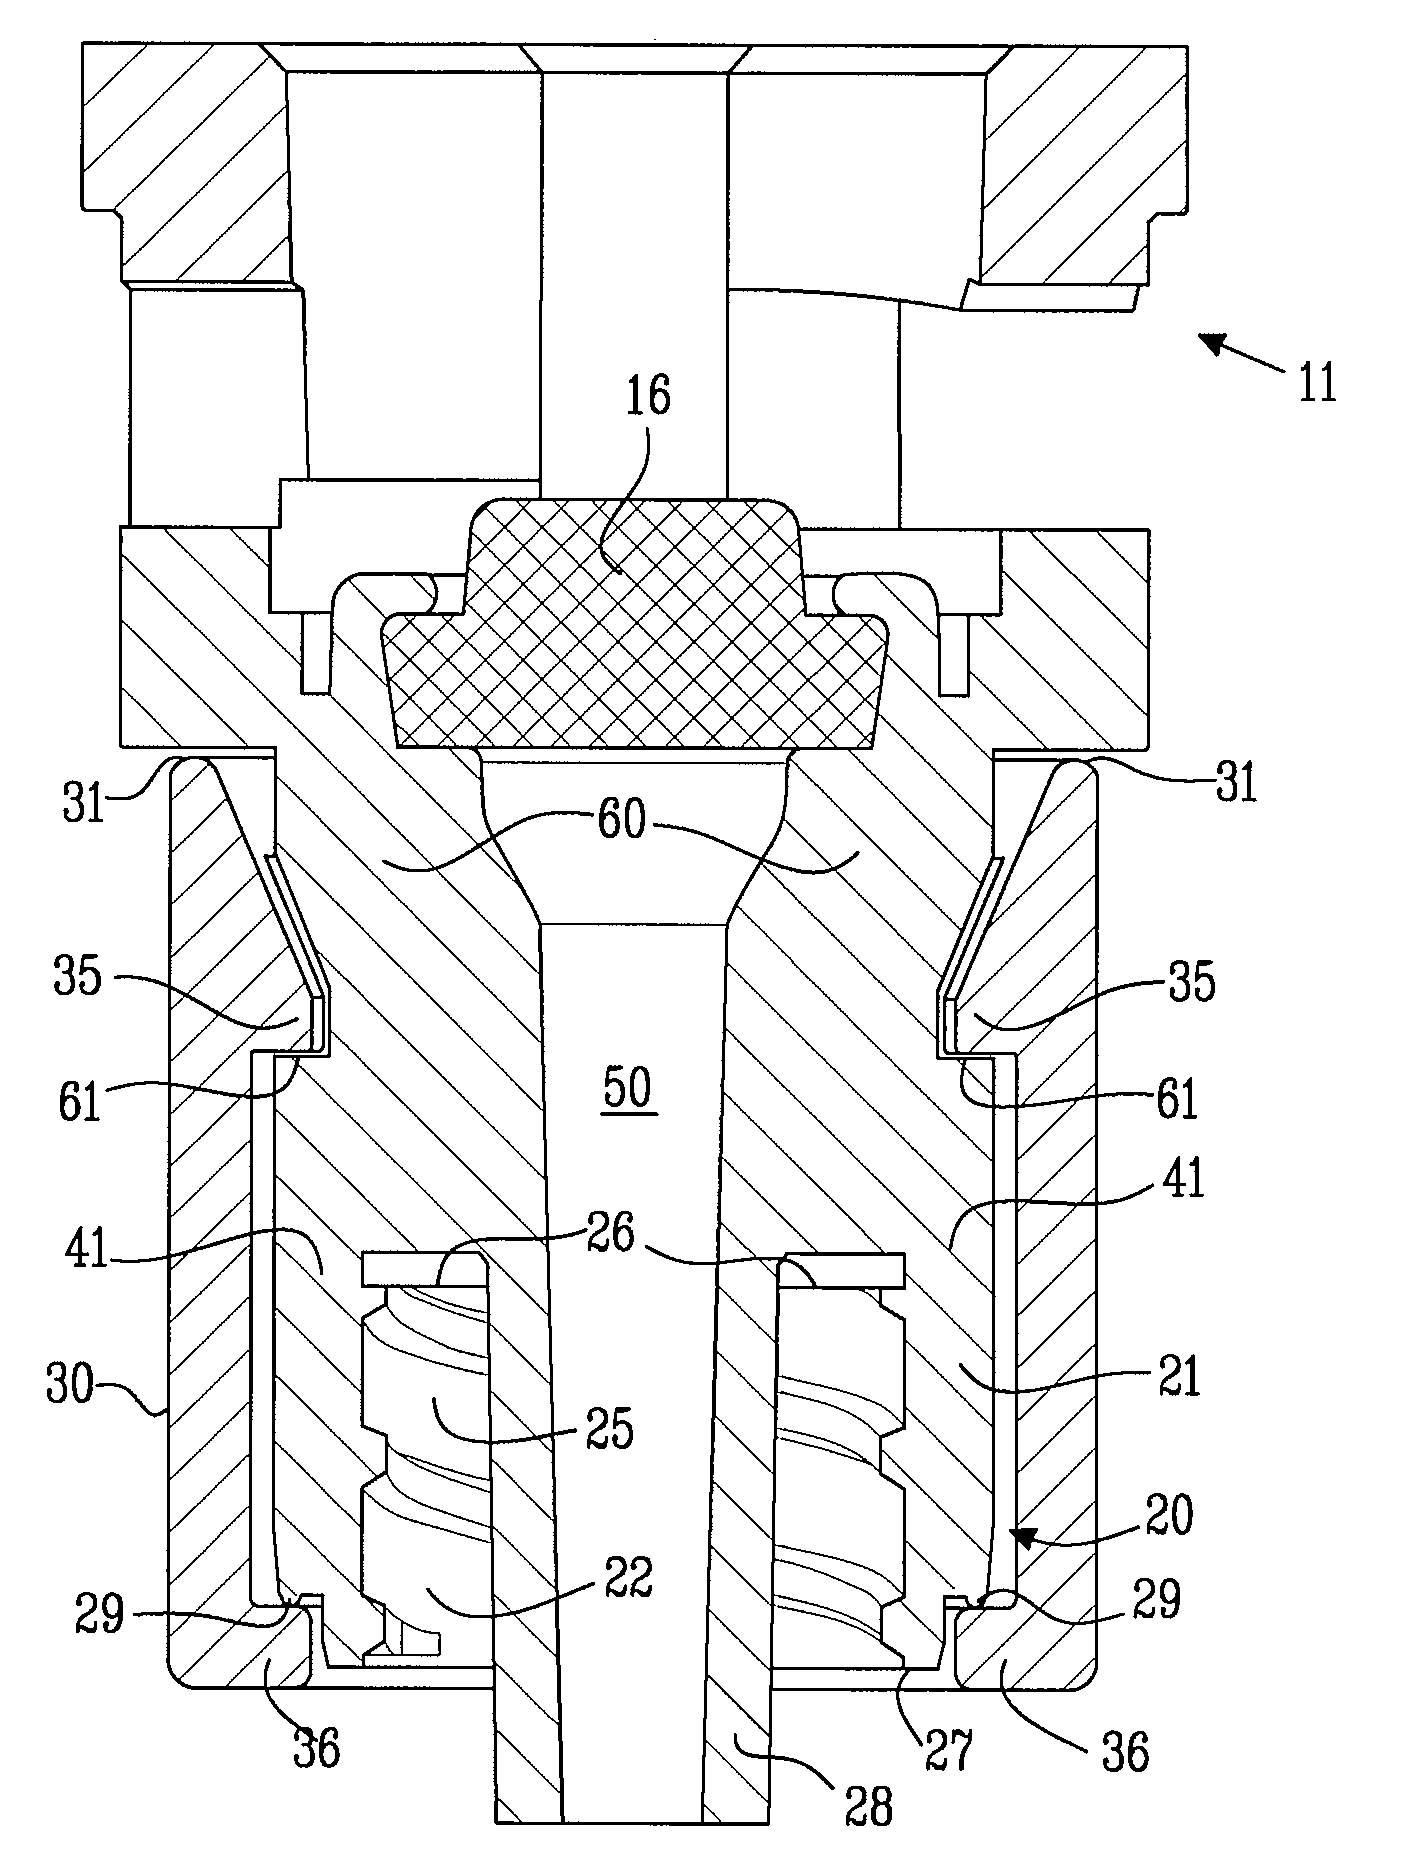 Connection arrangement and method for connecting a medical device to the improved connection arrangement